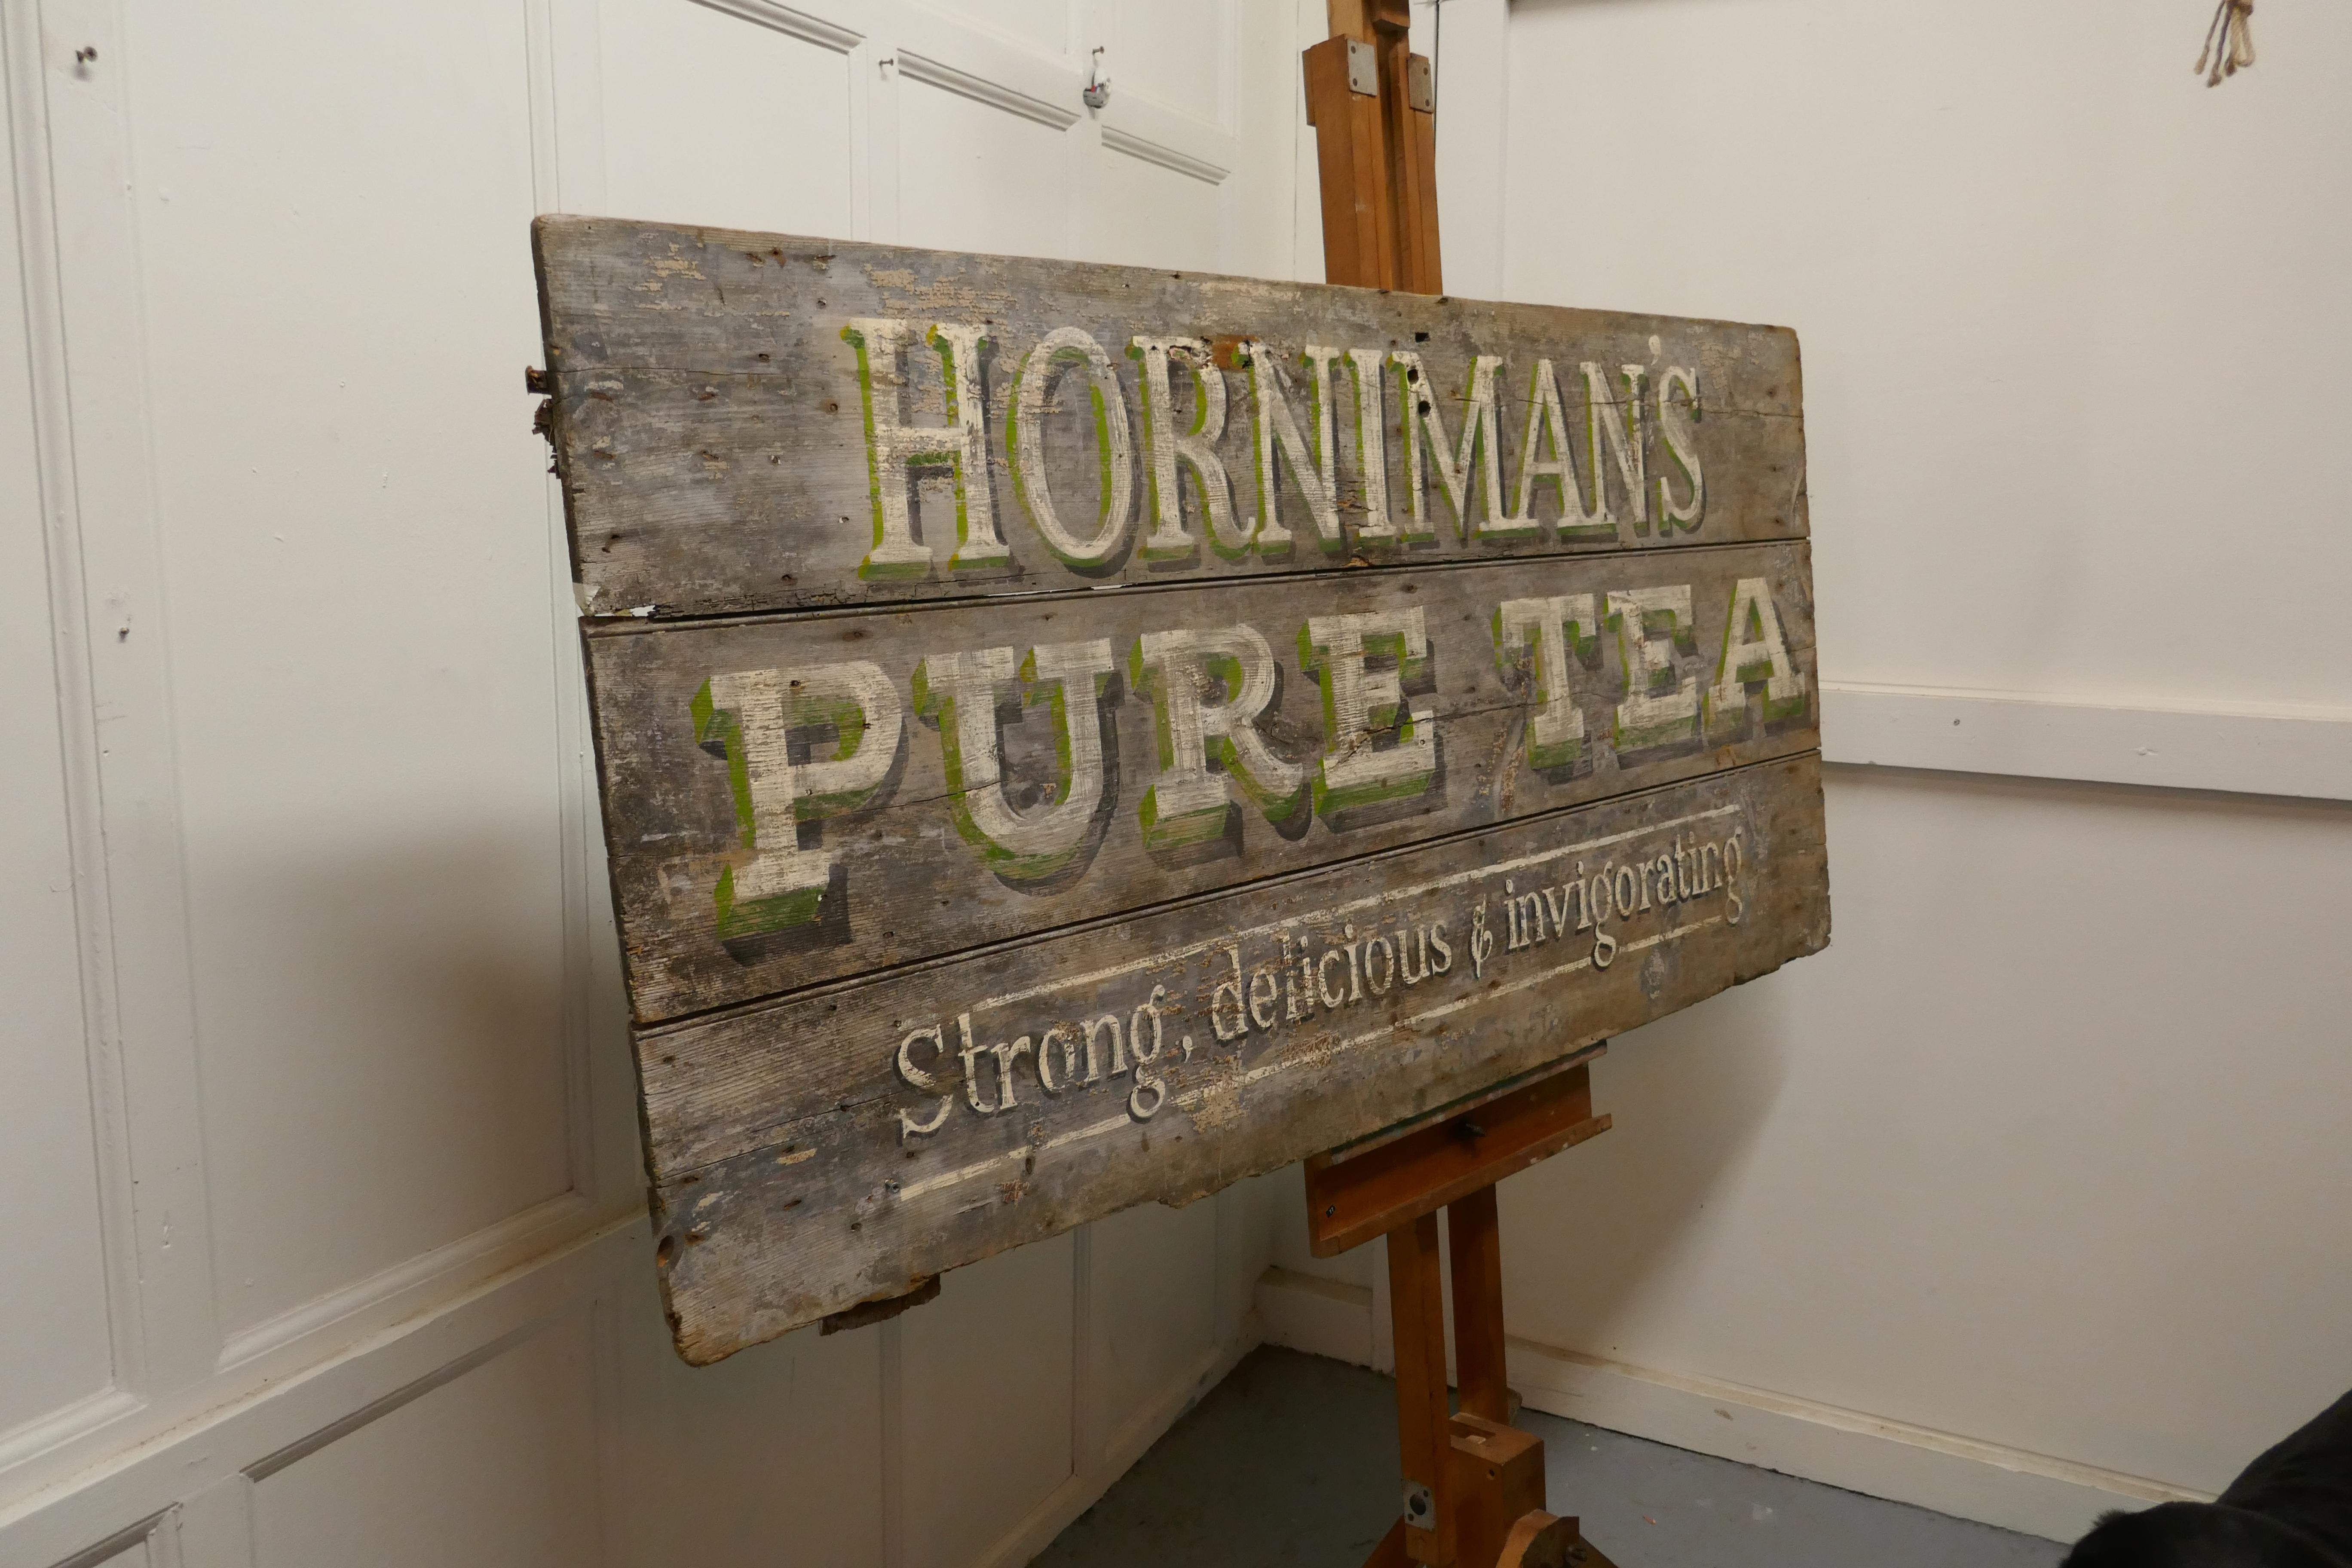 Large Painted Wooden Advertising Sign, “HORNIMAN’S PURE TEA” For Sale 2